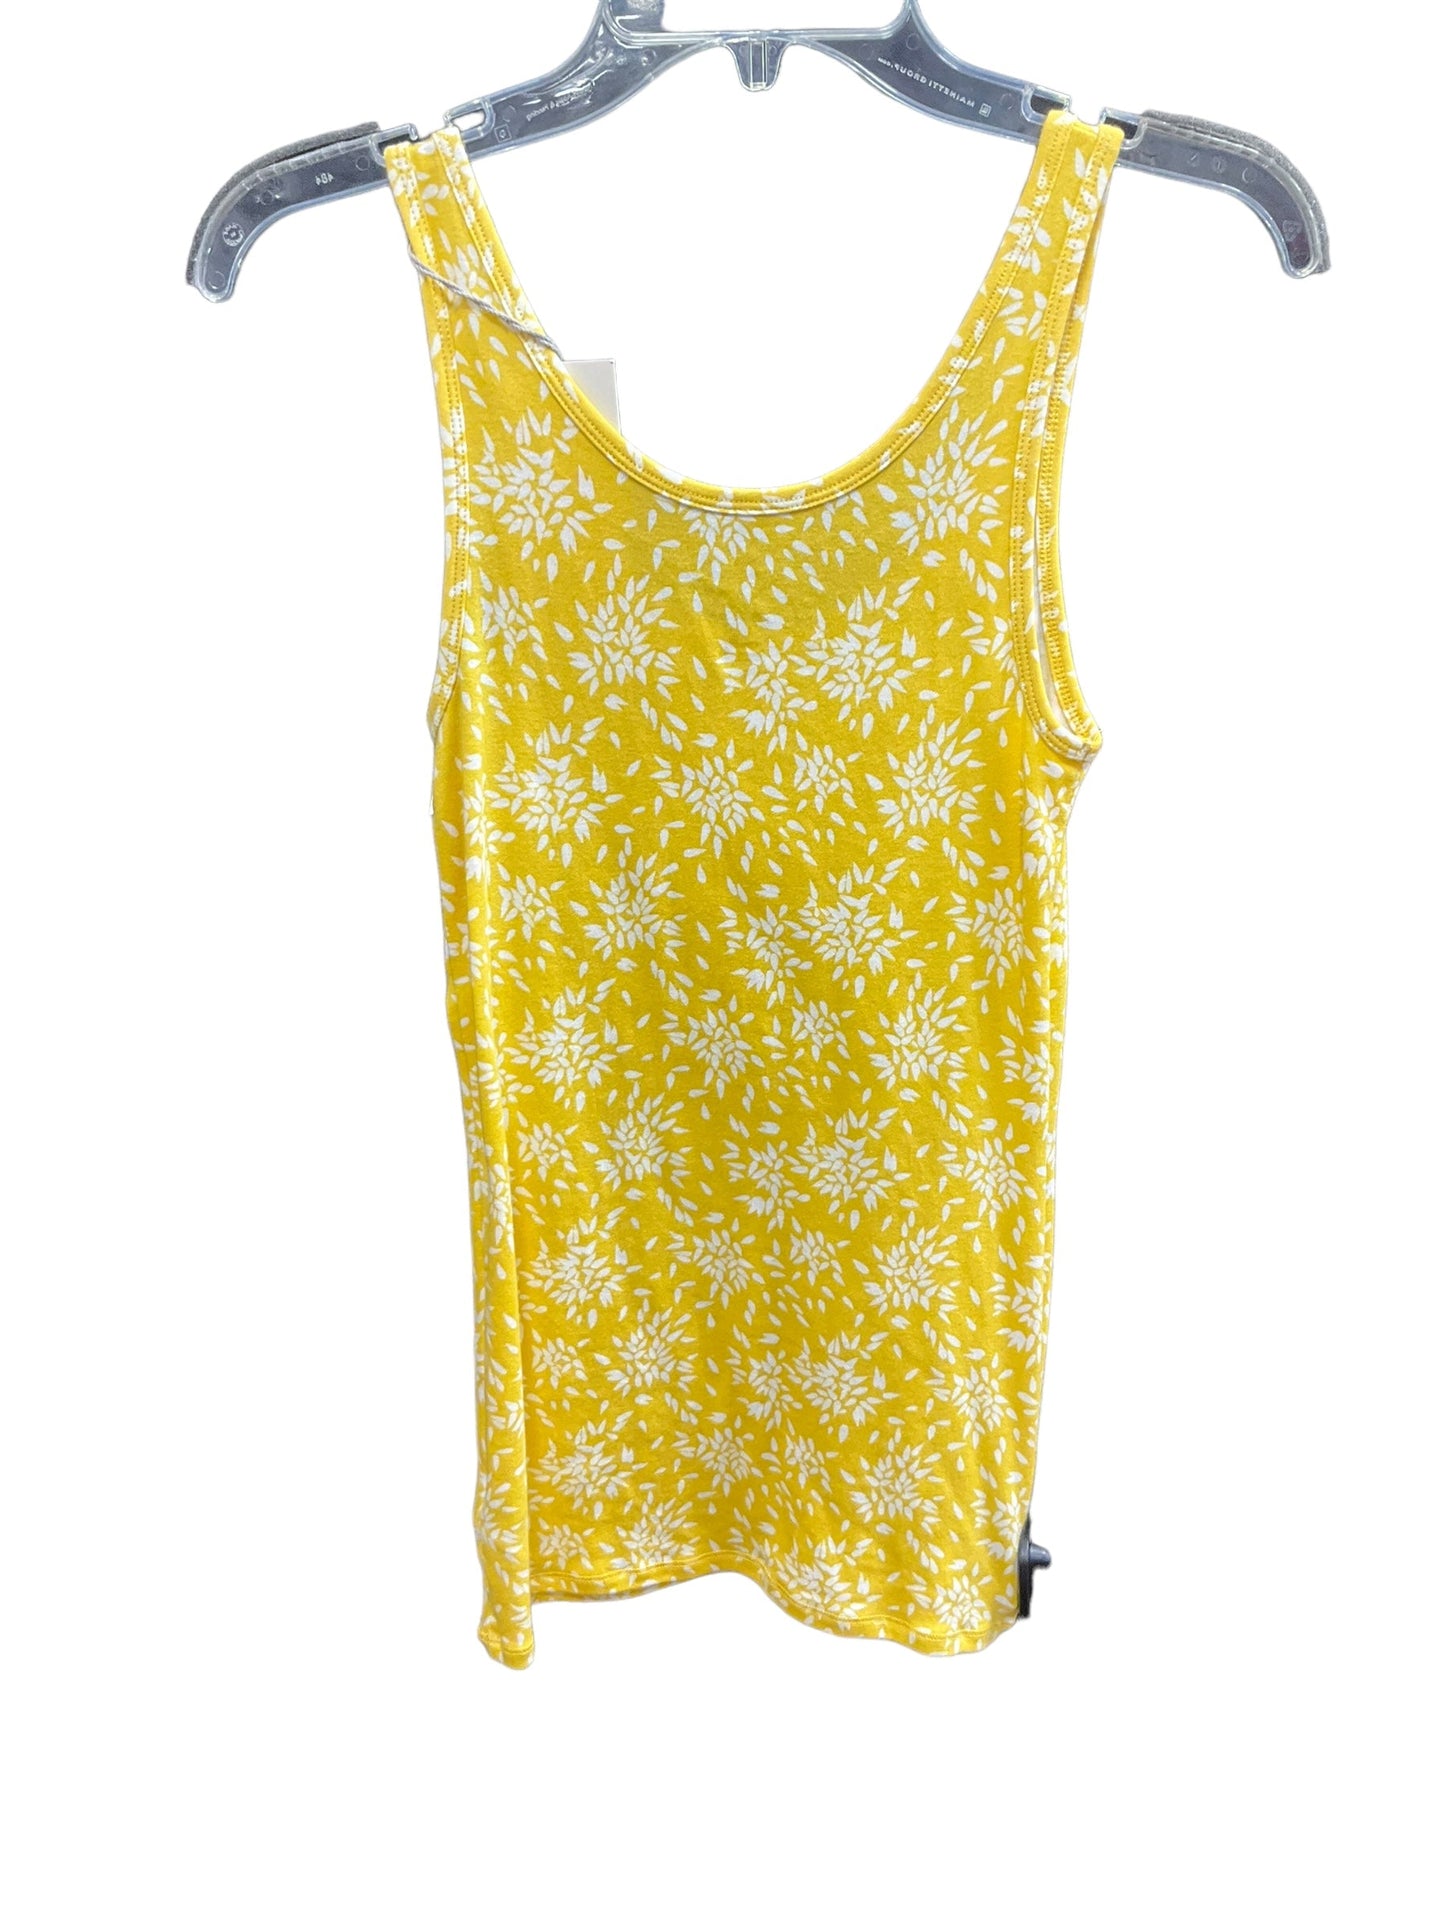 Yellow Top Sleeveless Basic A New Day, Size M